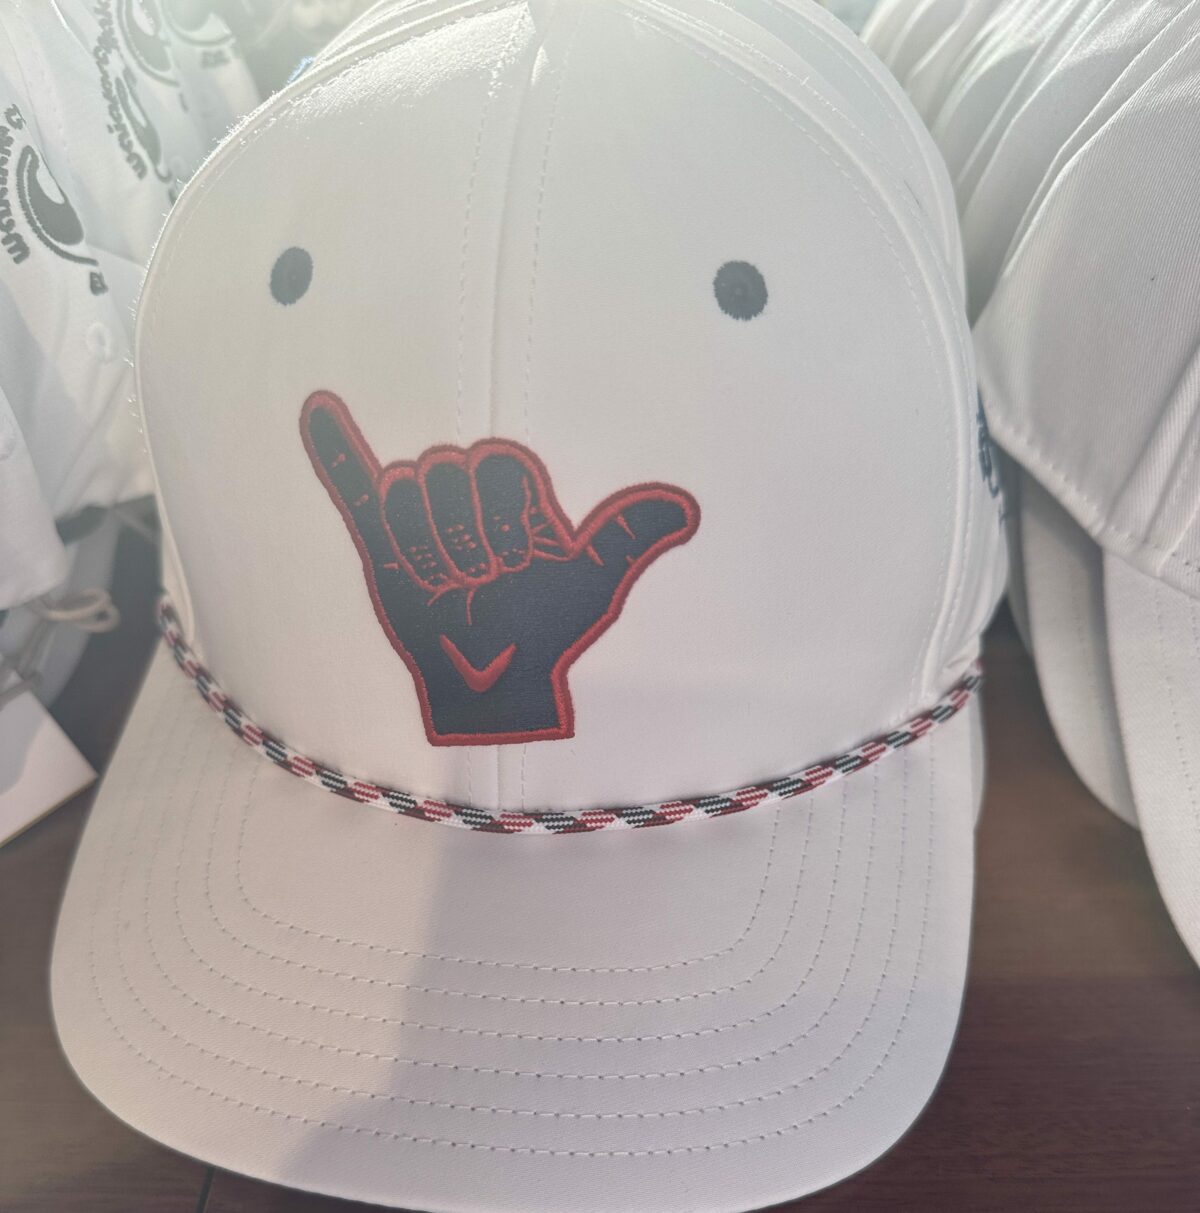 Merchandise photos: Hats off to Sony Open for its creative hat selection